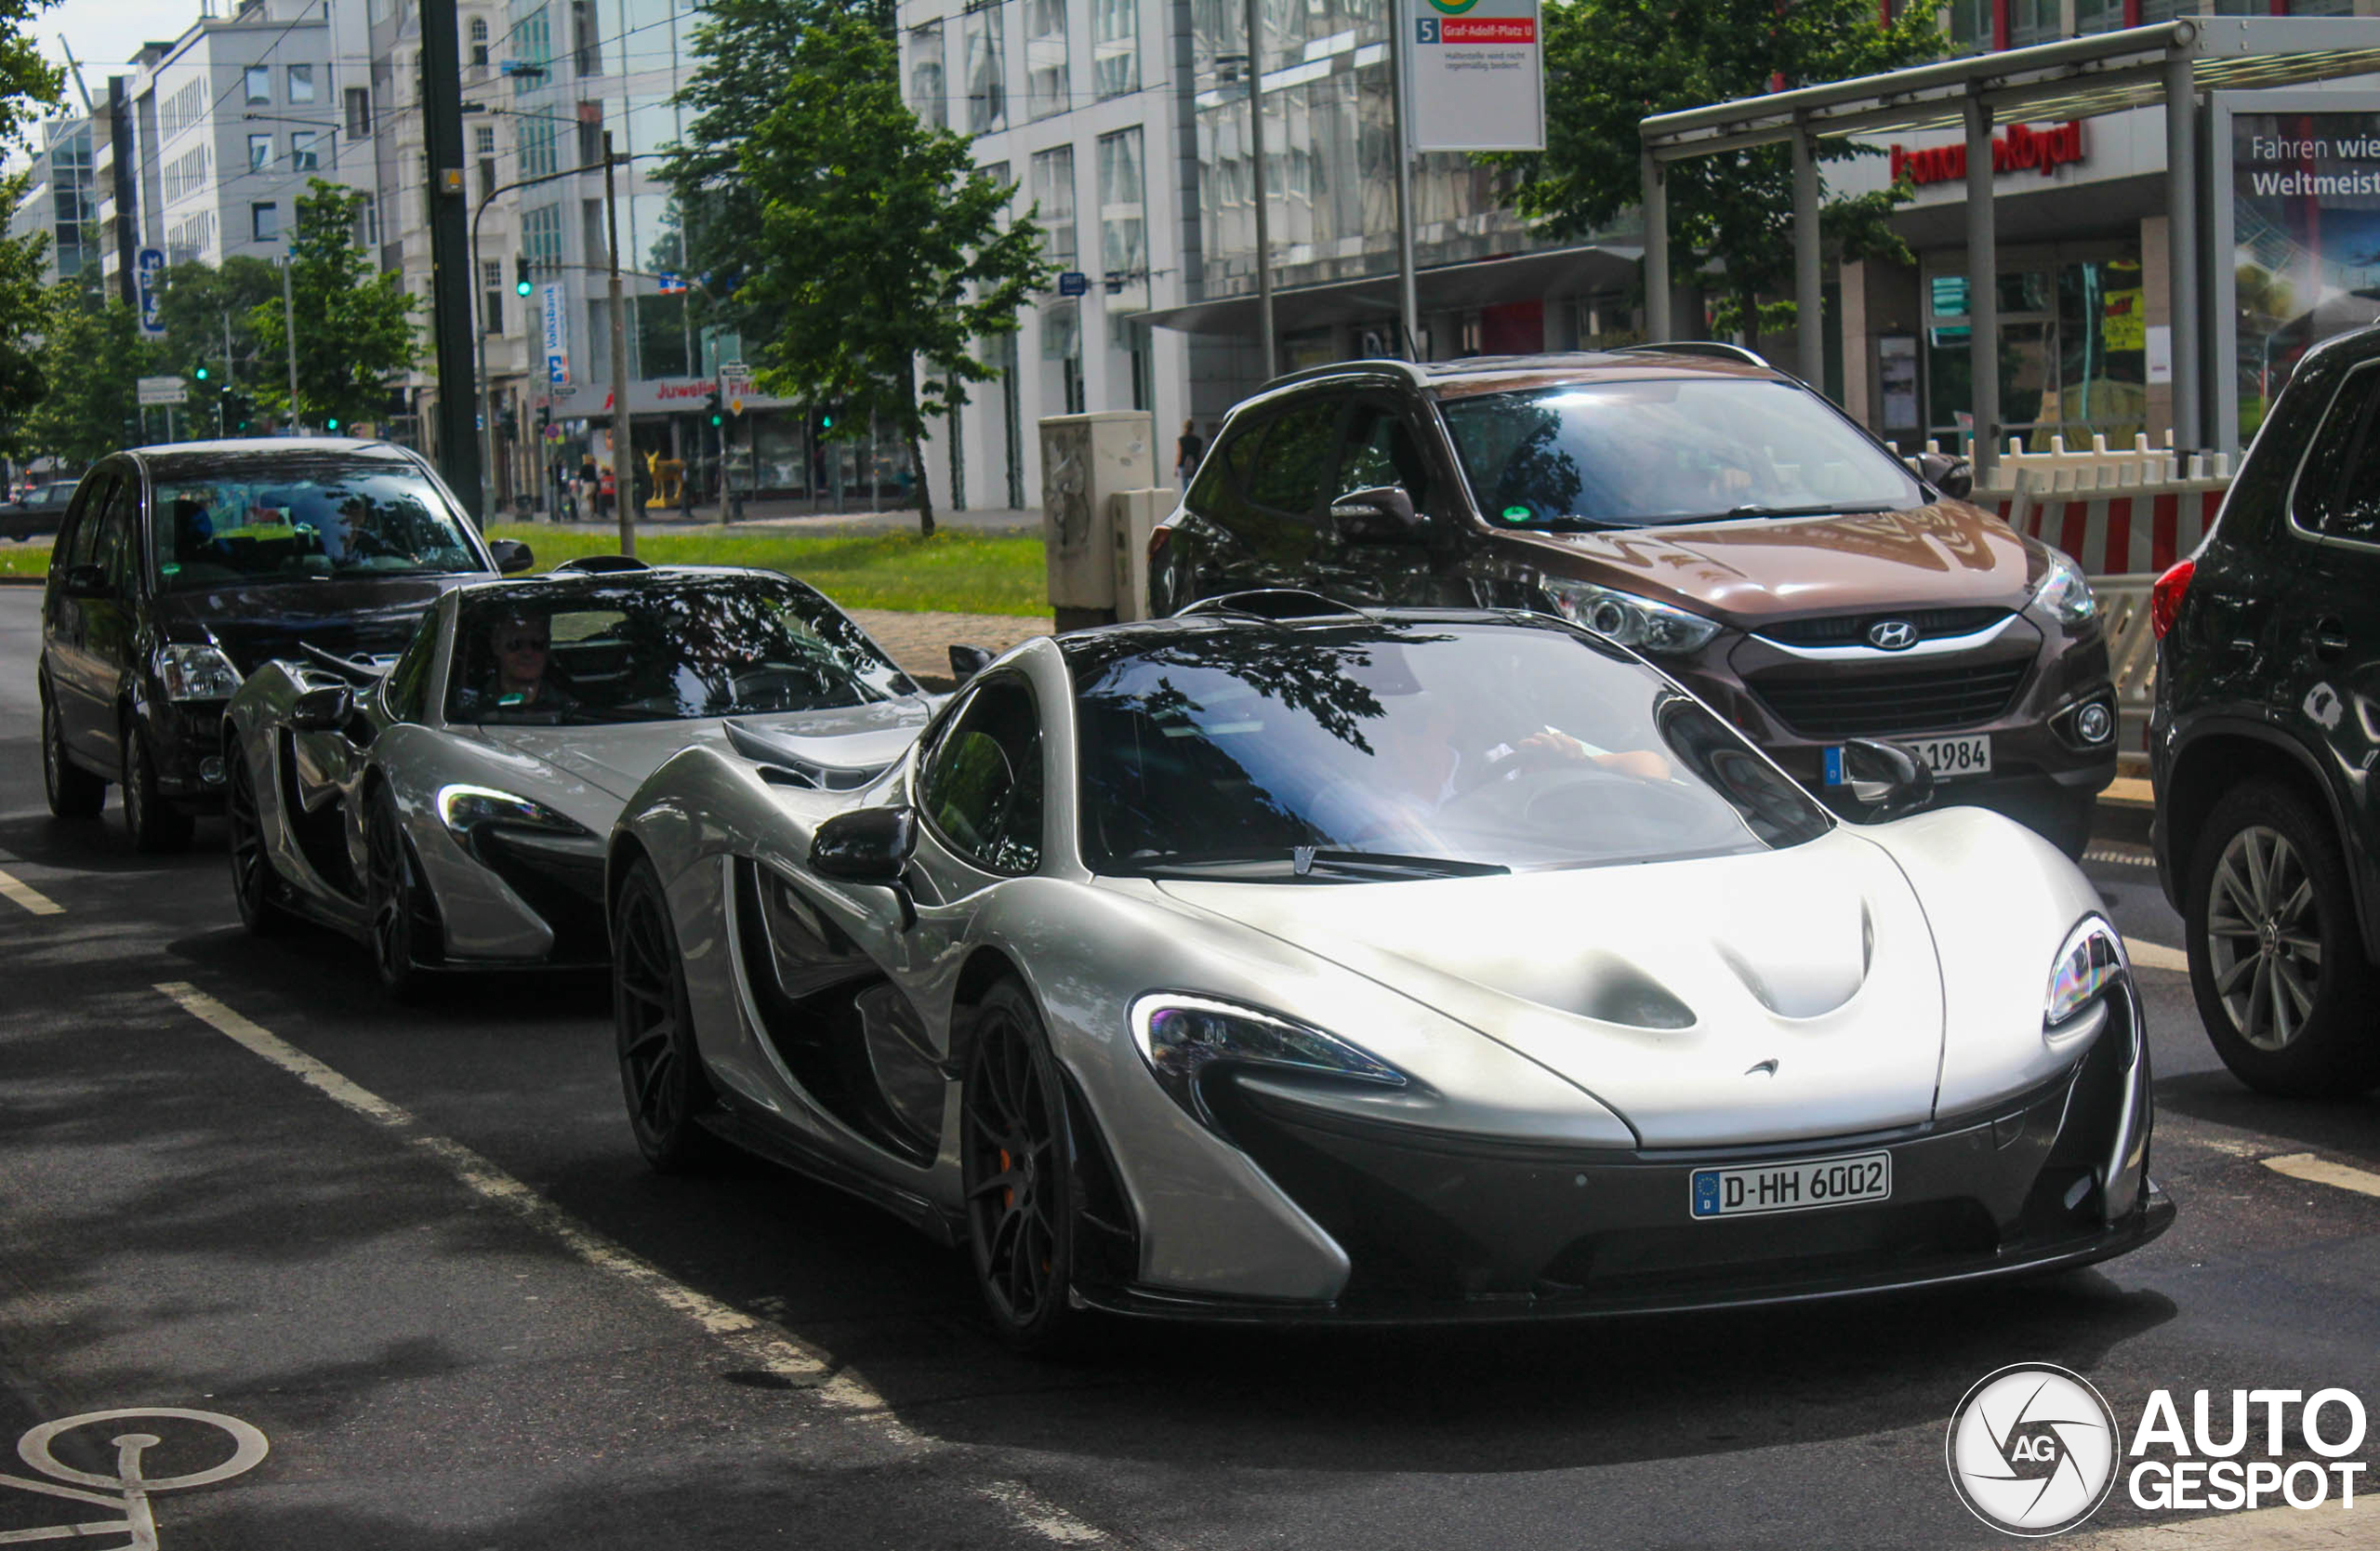 Not one but exactly two silver P1s were spotted in Düsseldorf